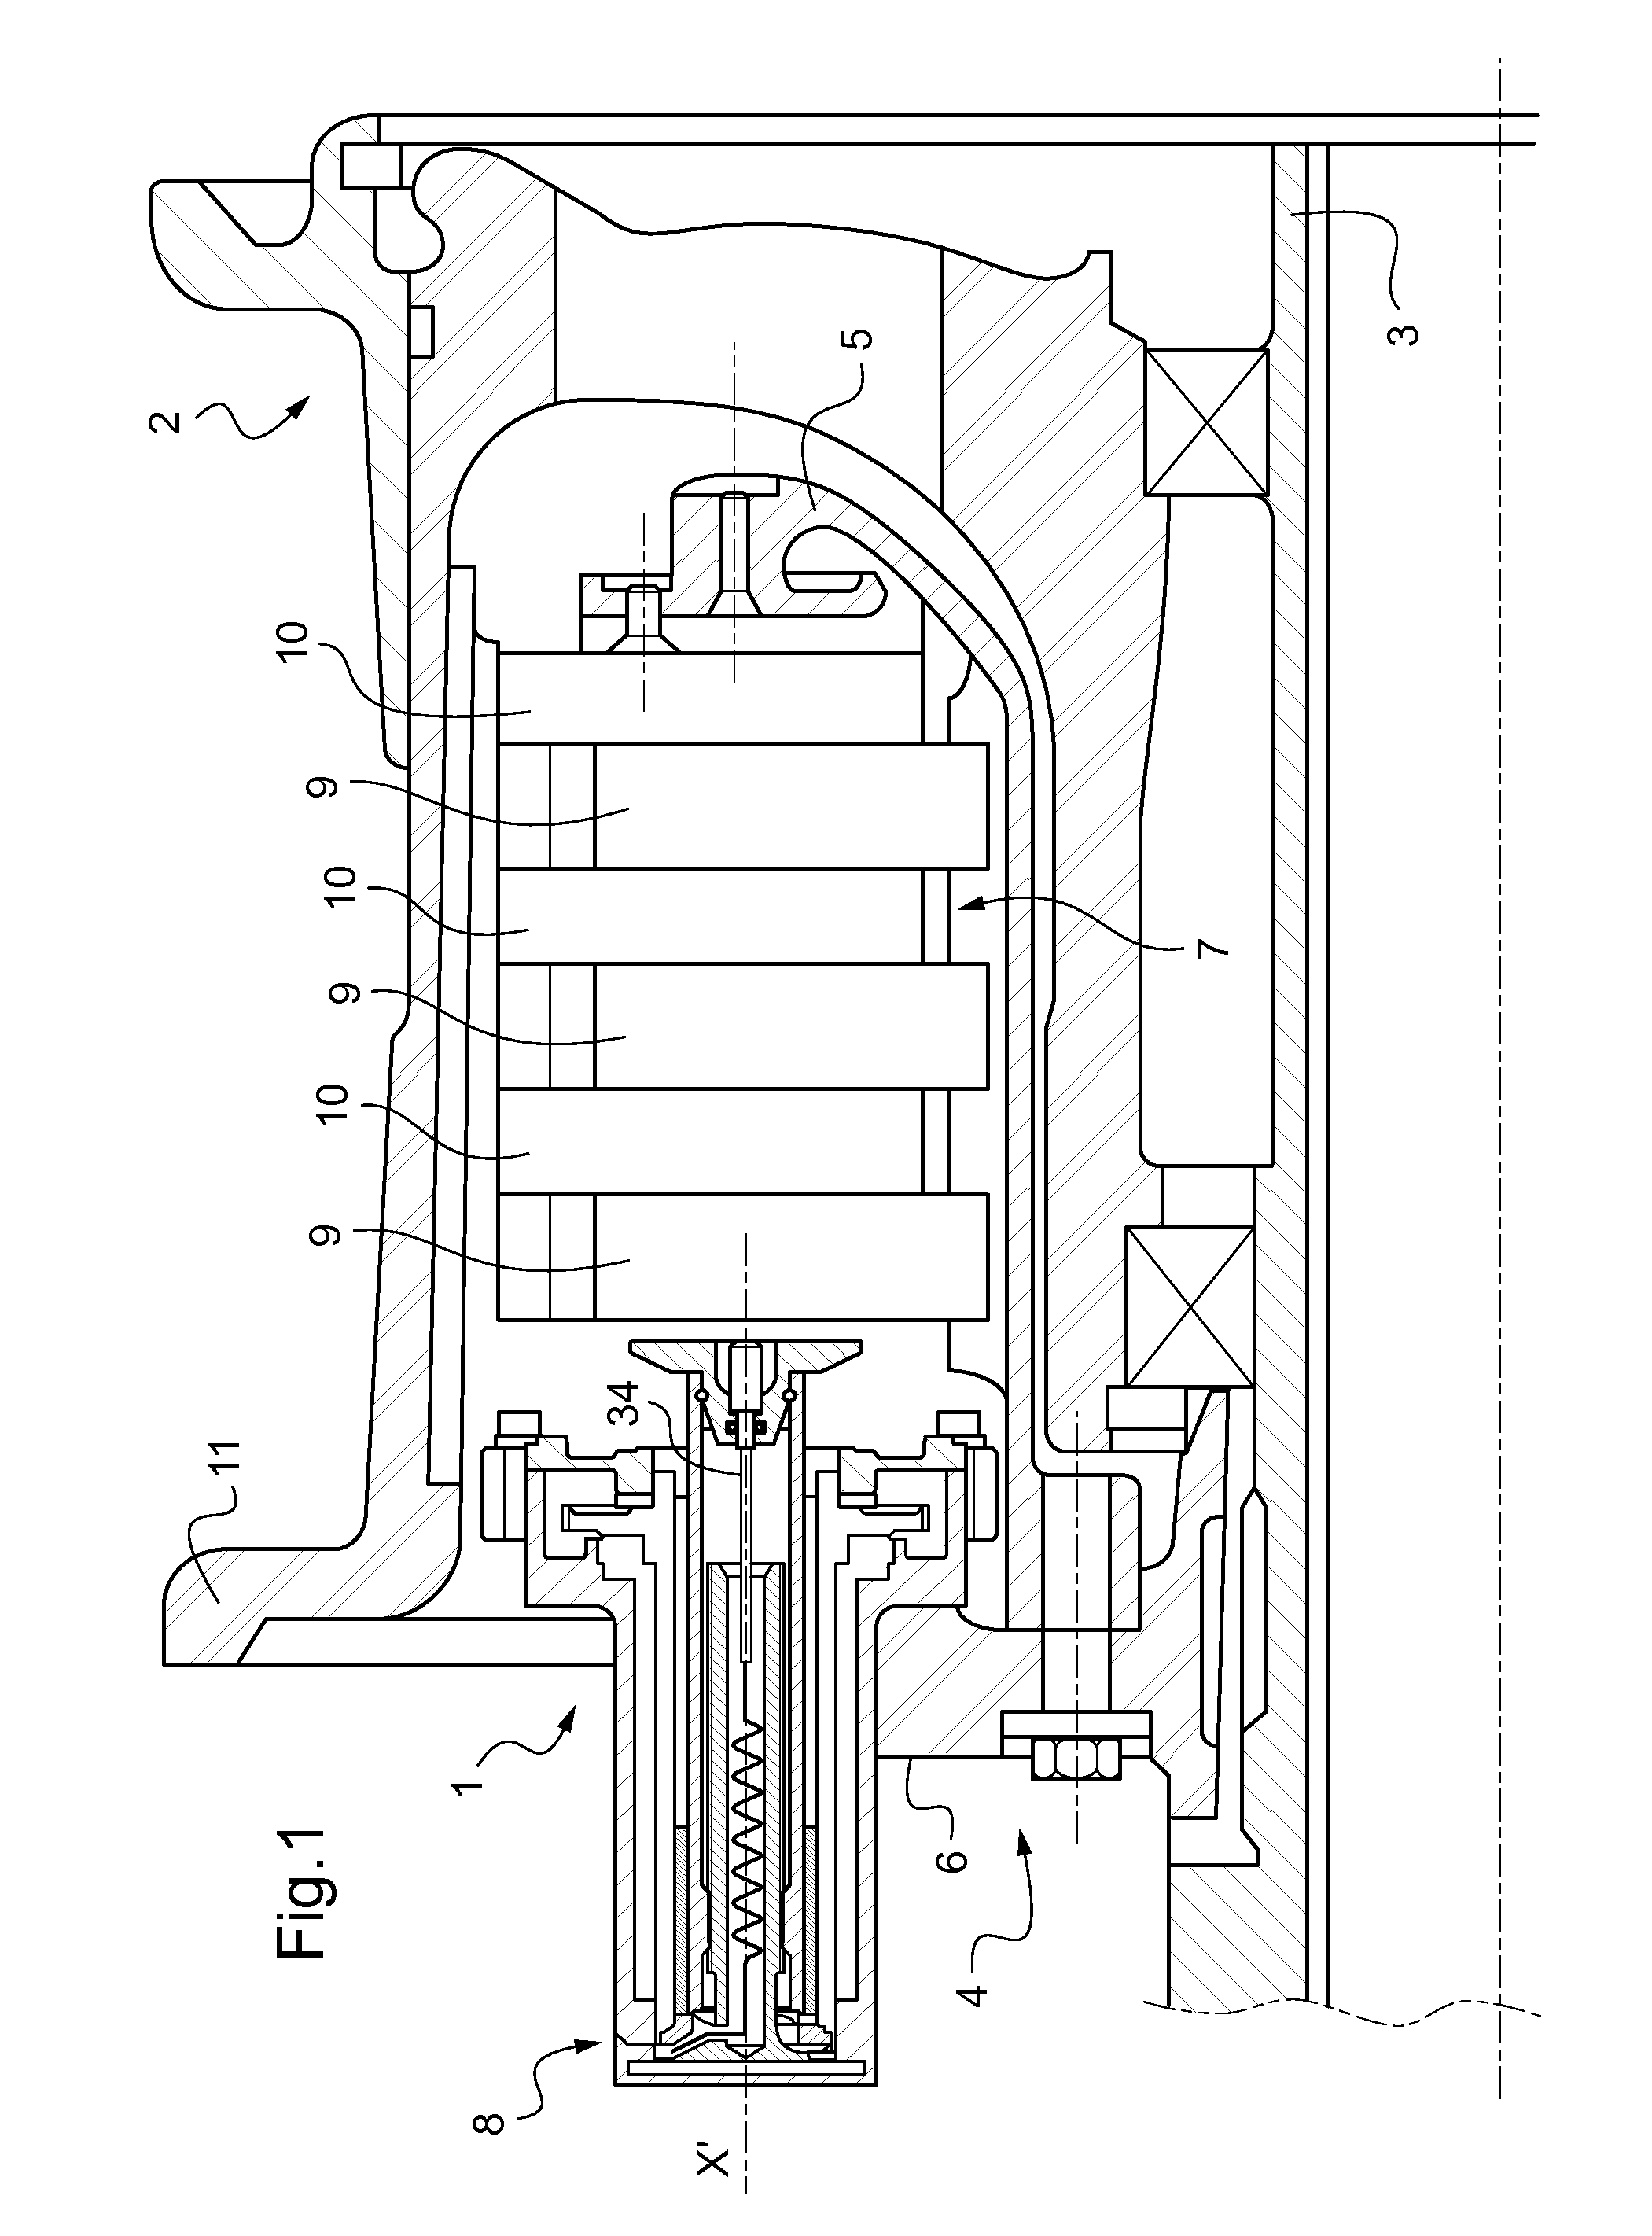 Electric brake for an aircraft wheel, the brake including an electromechanical actuator fitted with a temperature sensor